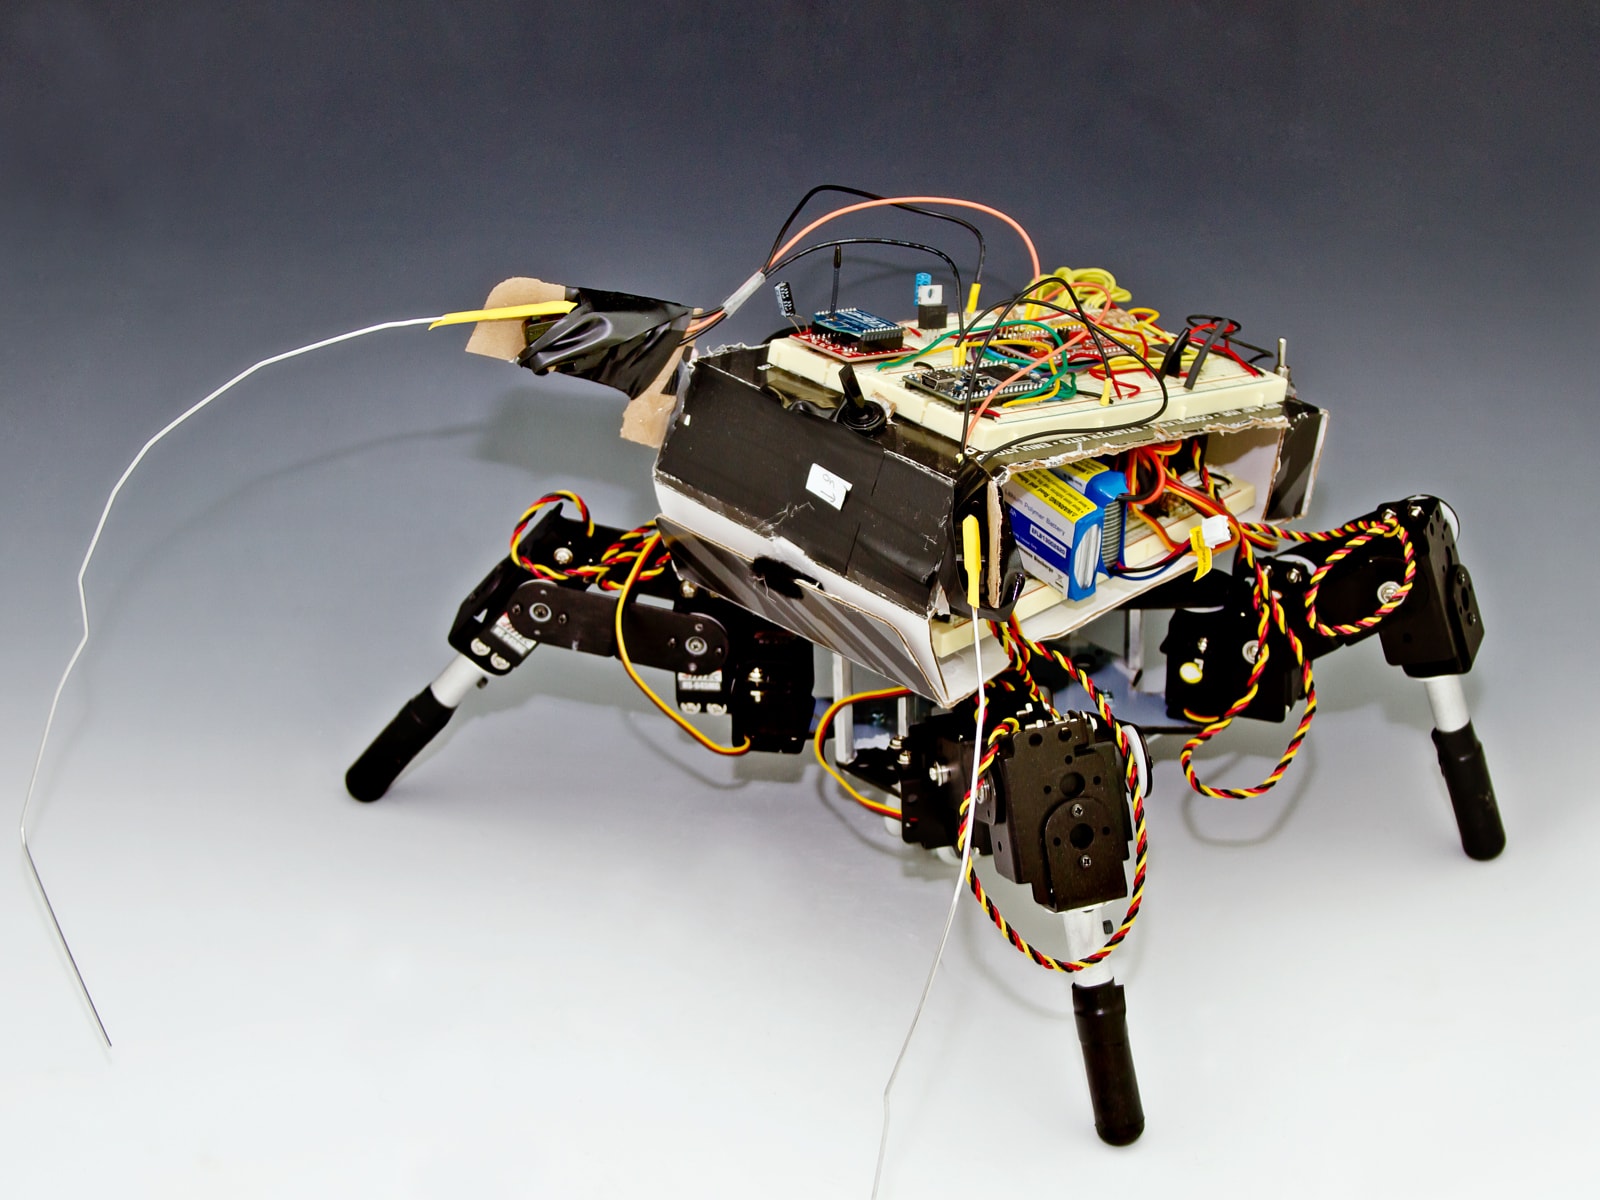 A four-legged robot with exposed wiring and circuitry.